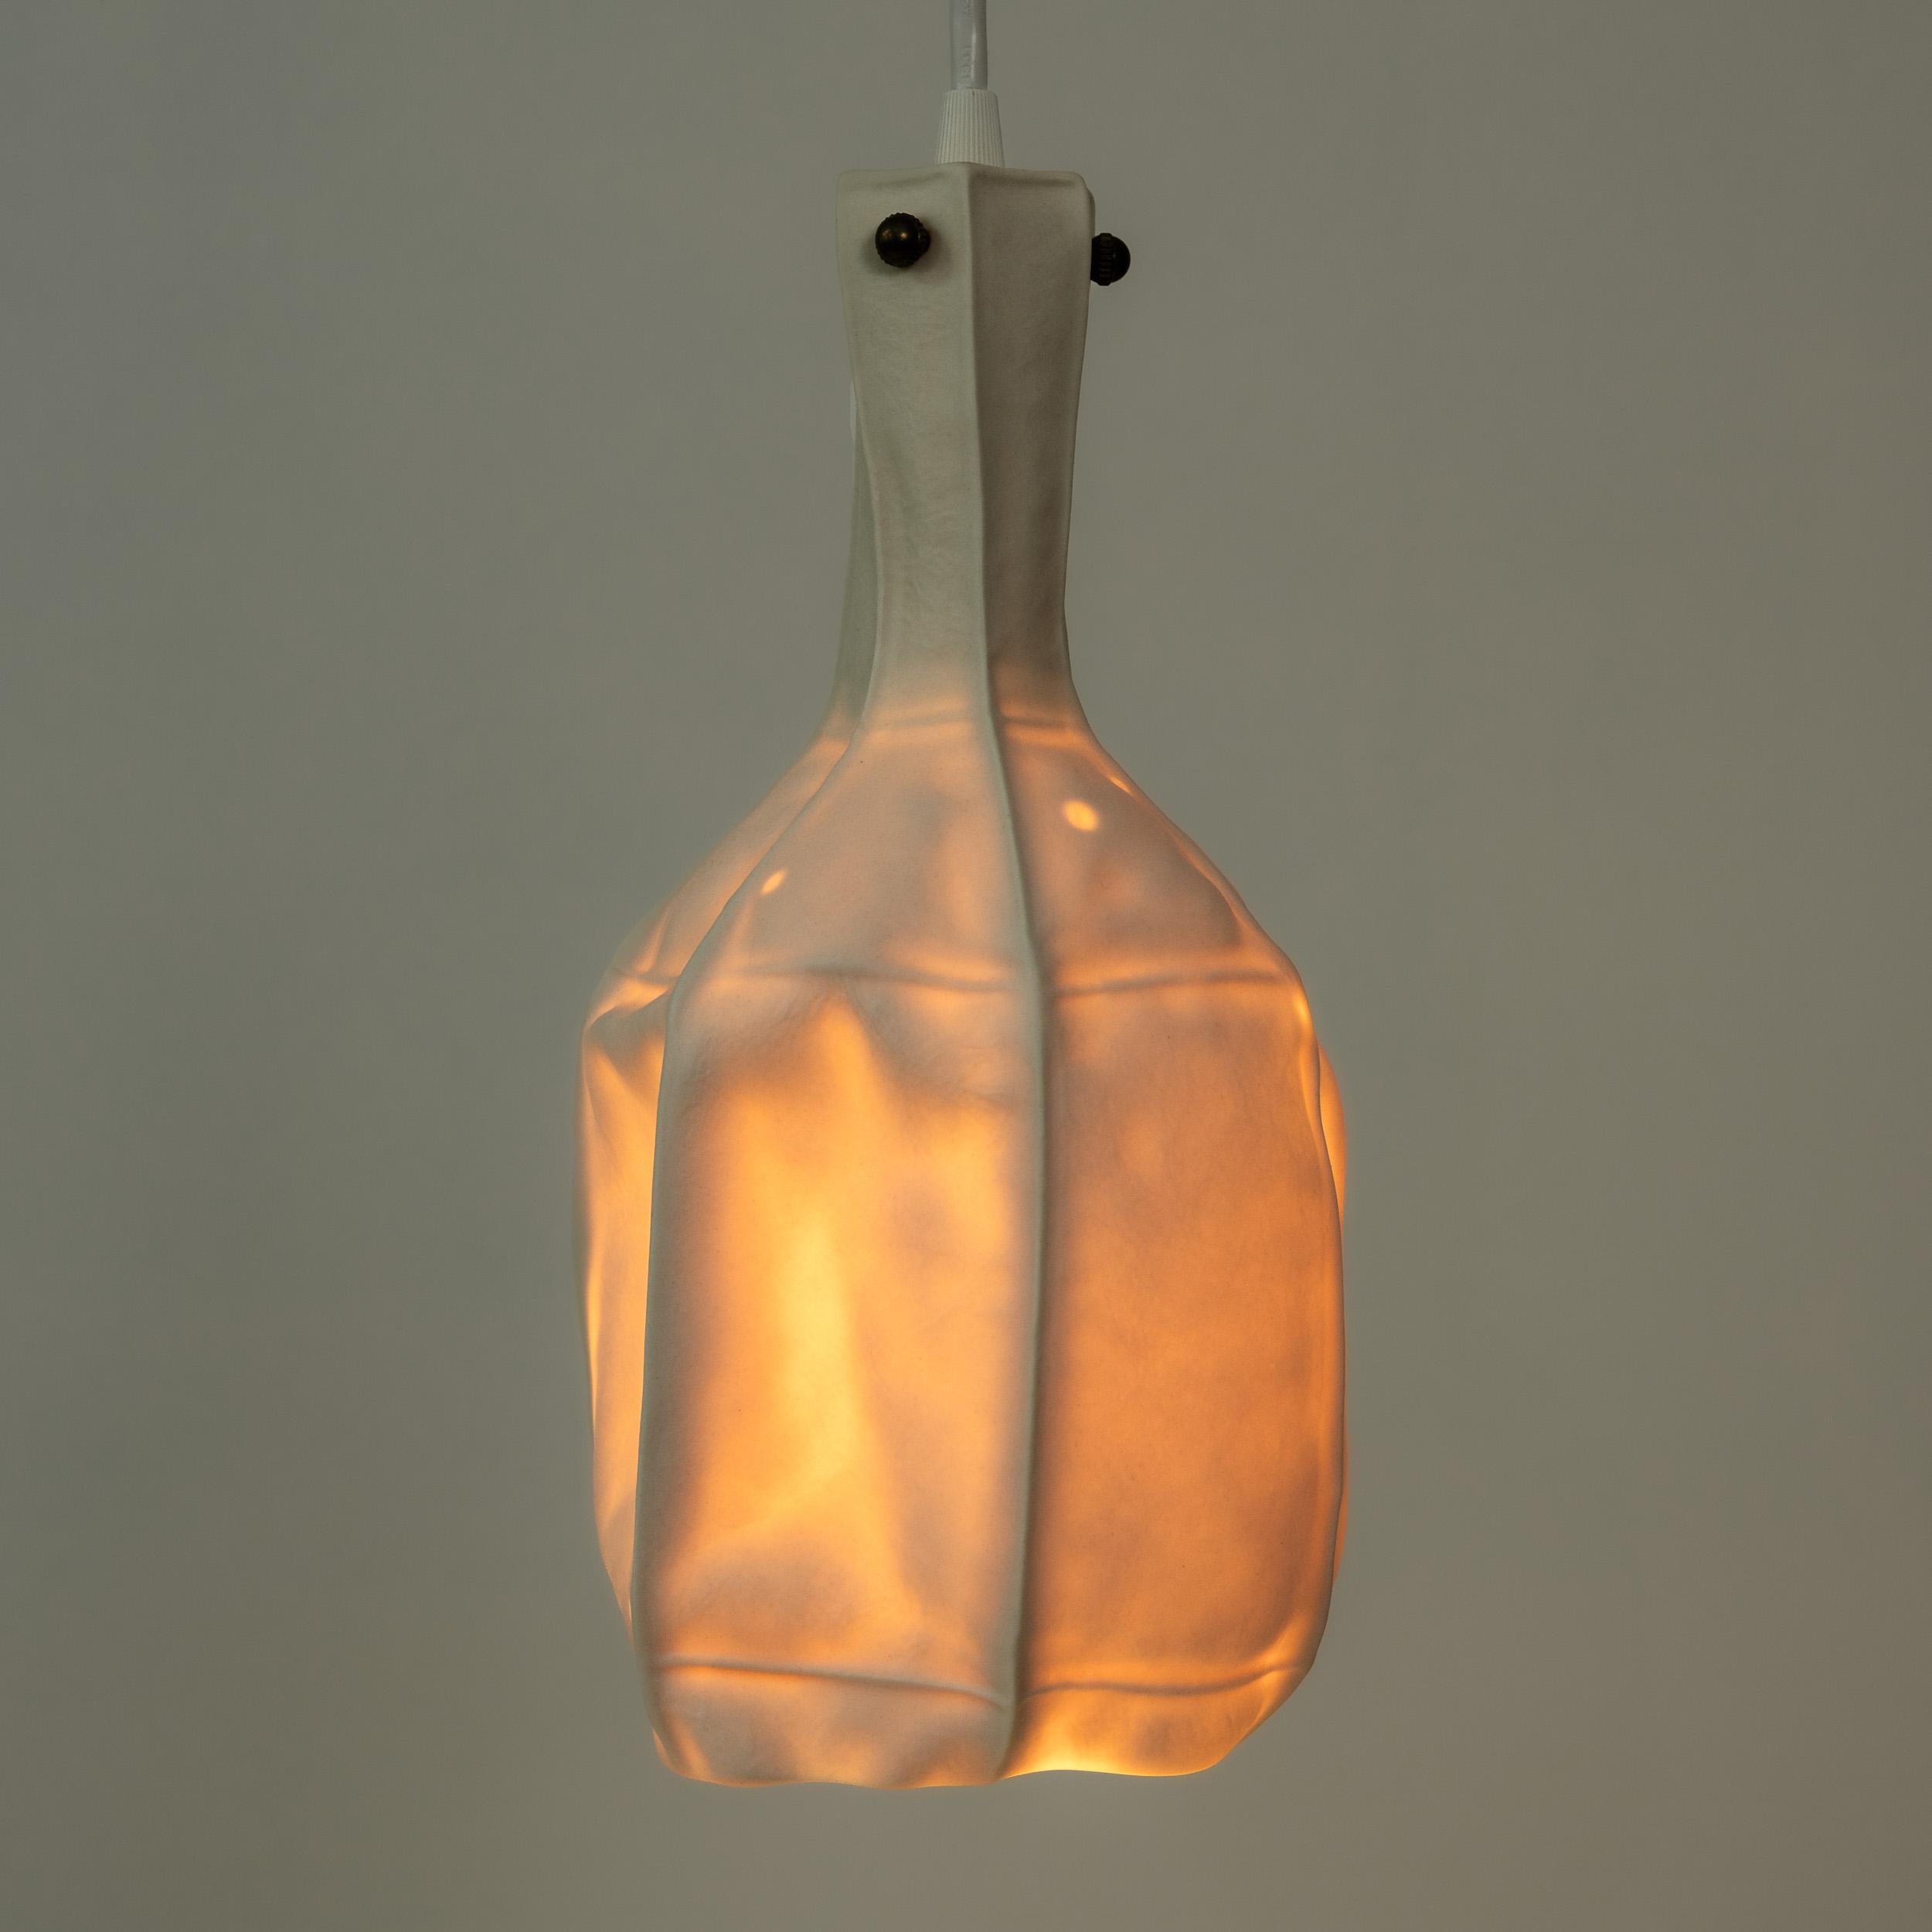 Kawa Series Leather-cast porcelain pendant light, white translucent ceramic In New Condition For Sale In Brooklyn, NY